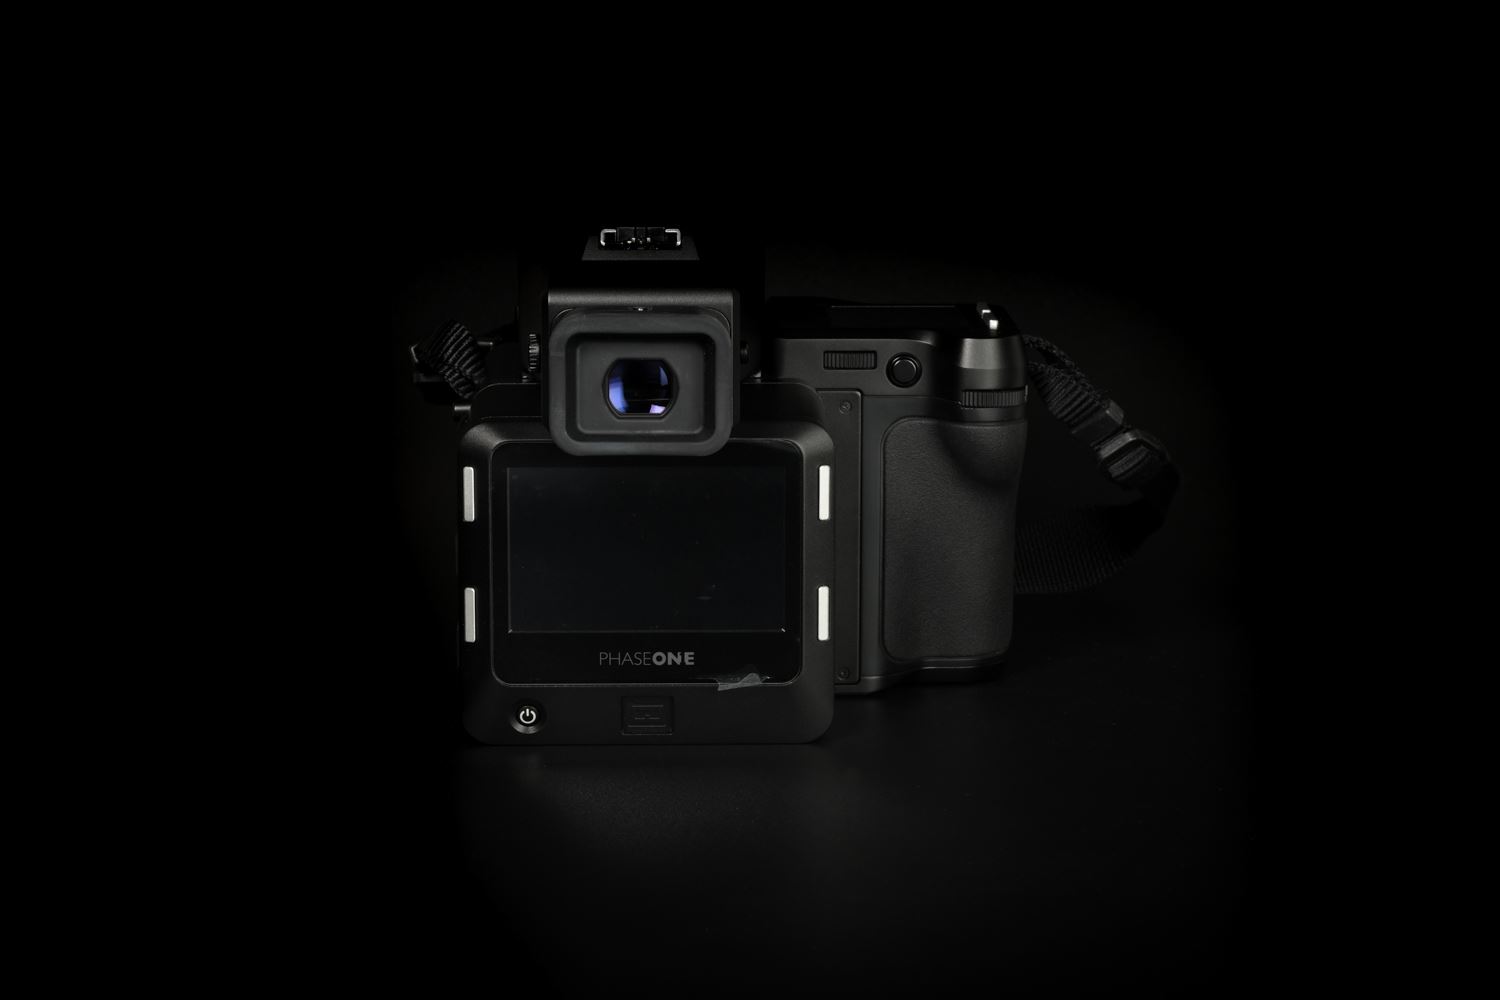 Picture of PhaseOne IQ180 Digital Back with XF Camera Body, Schneider 80mm f/2.8 LS, 55mm f/2.8 LS